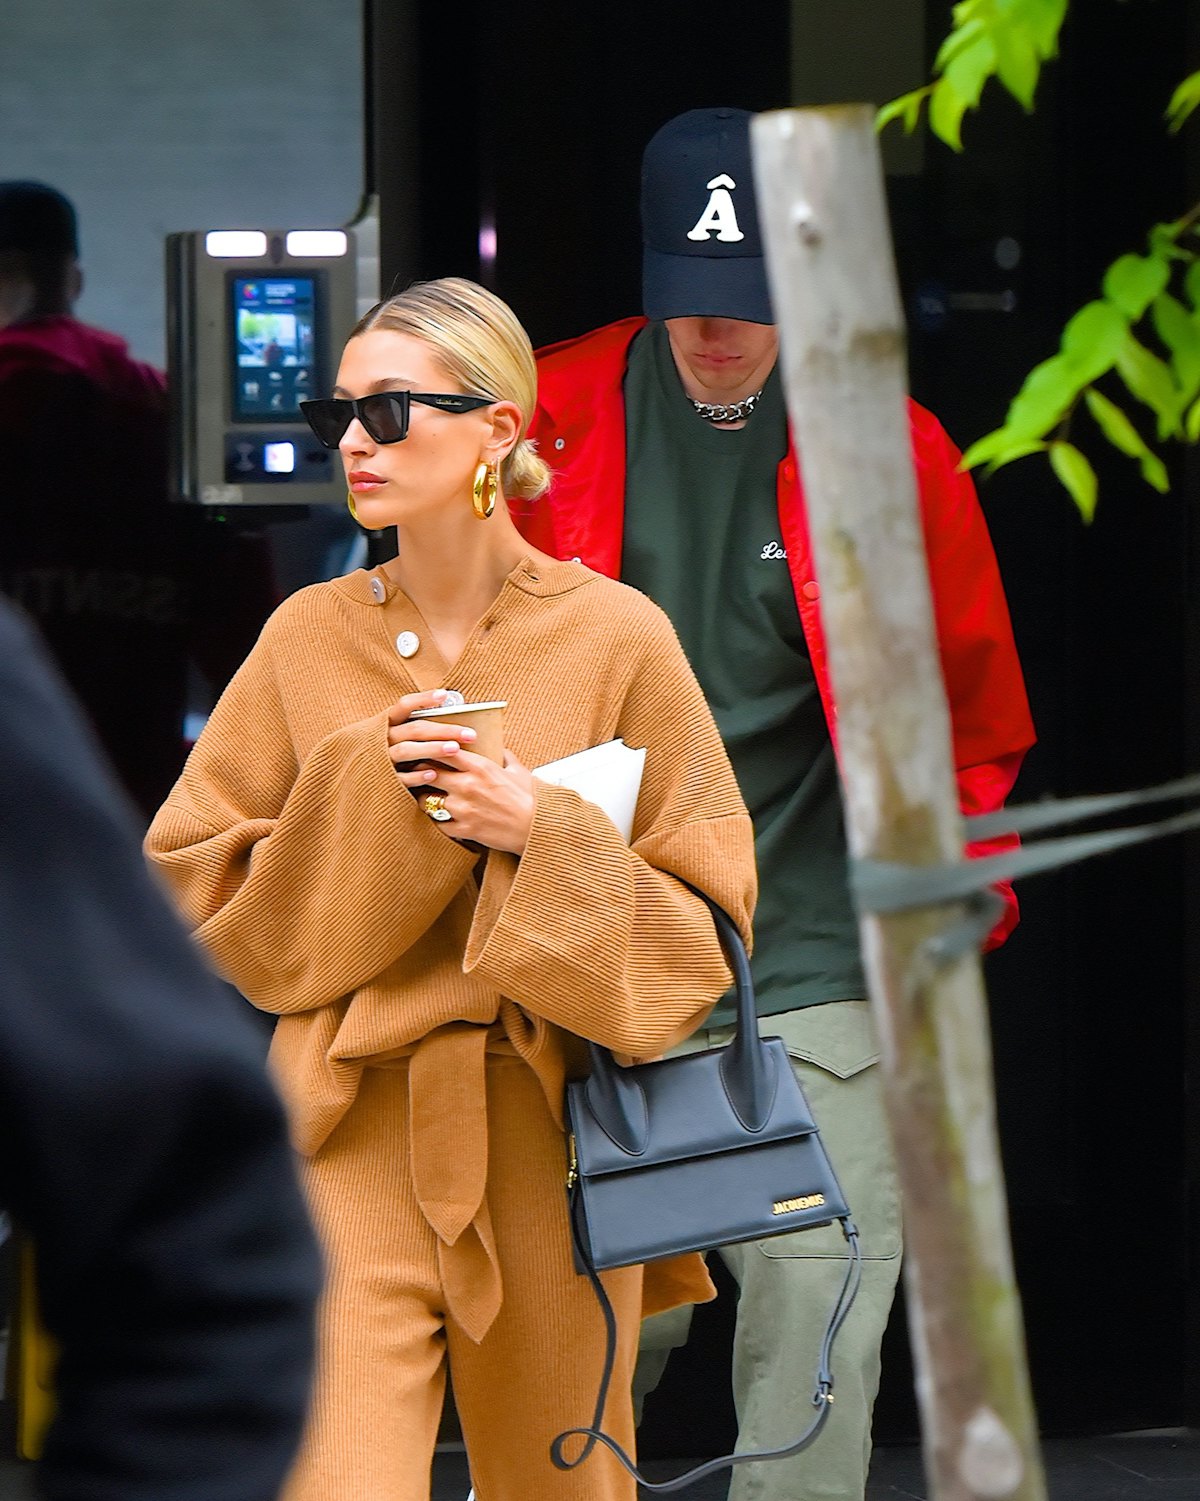 NEW YORK, NY - MAY 03: Justin Bieber and Hailey Baldwin seen in Manhattan on May 3, 2019 in New York City.  (Photo by Robert Kamau / GC Images)